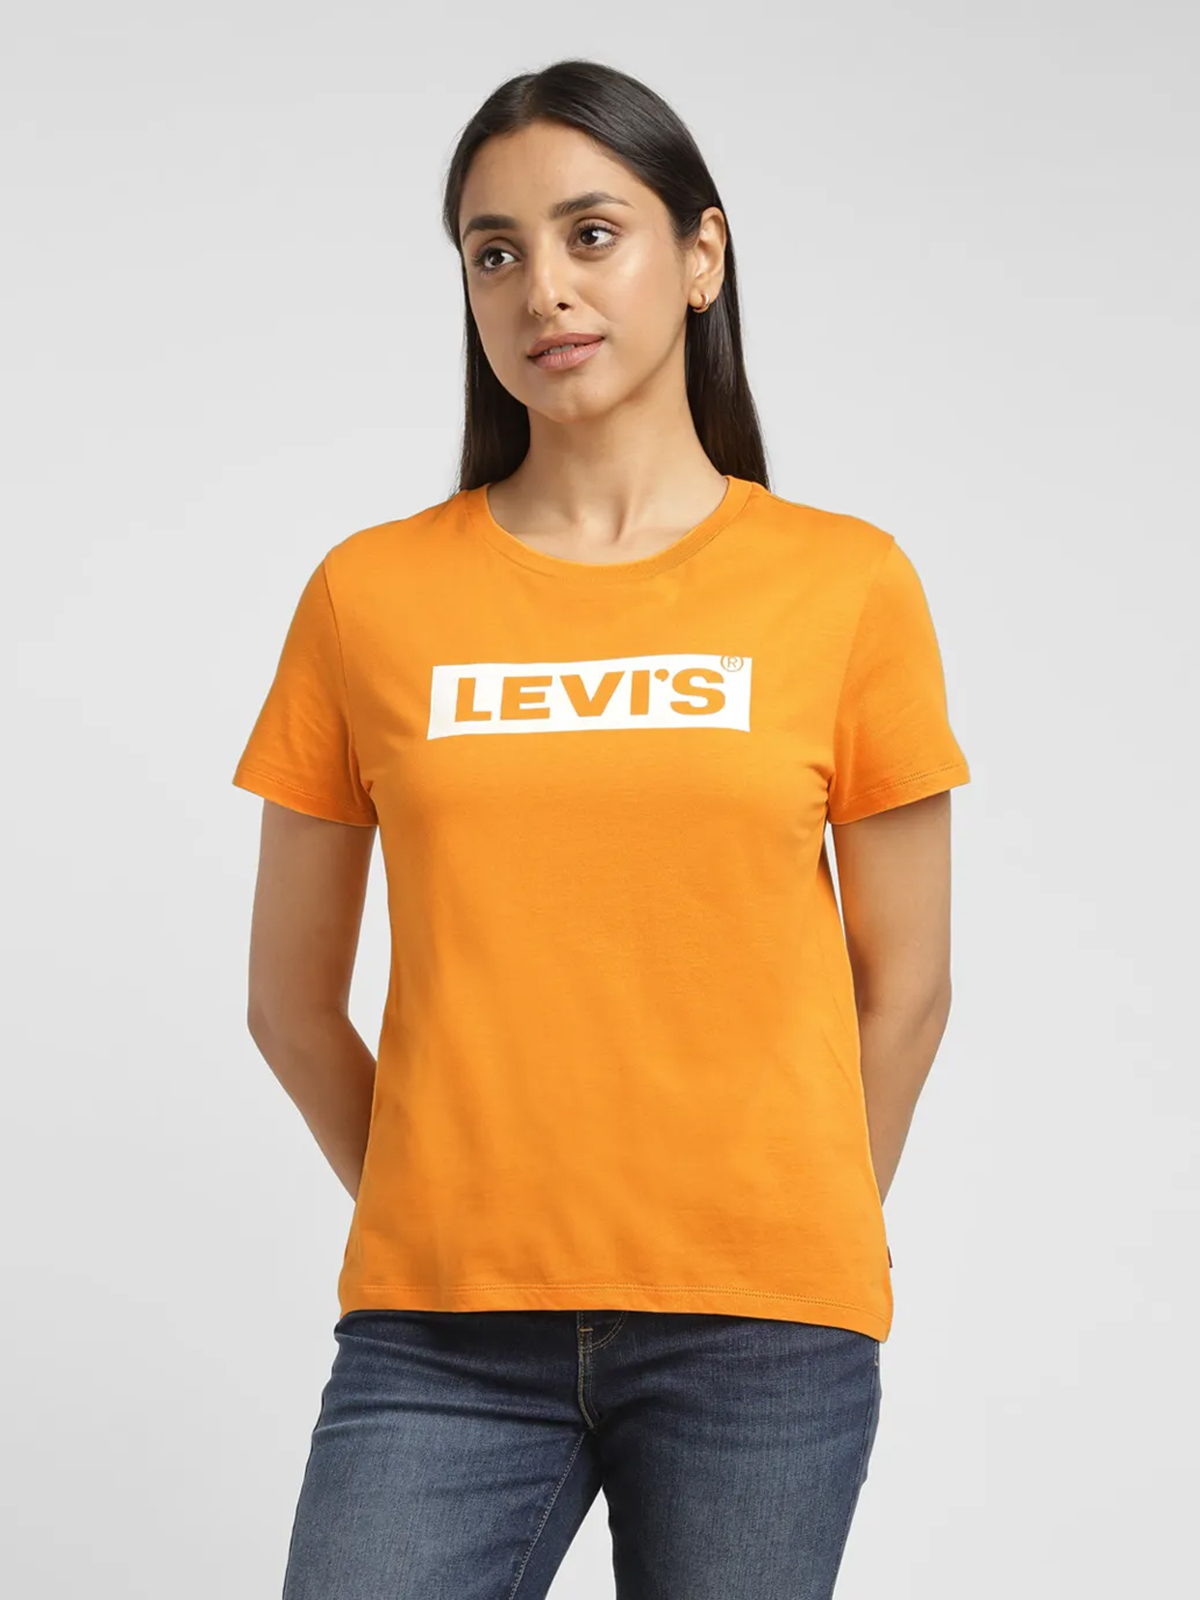 Levis cotton yellow half sleeves t shirt - G3-WTO4282